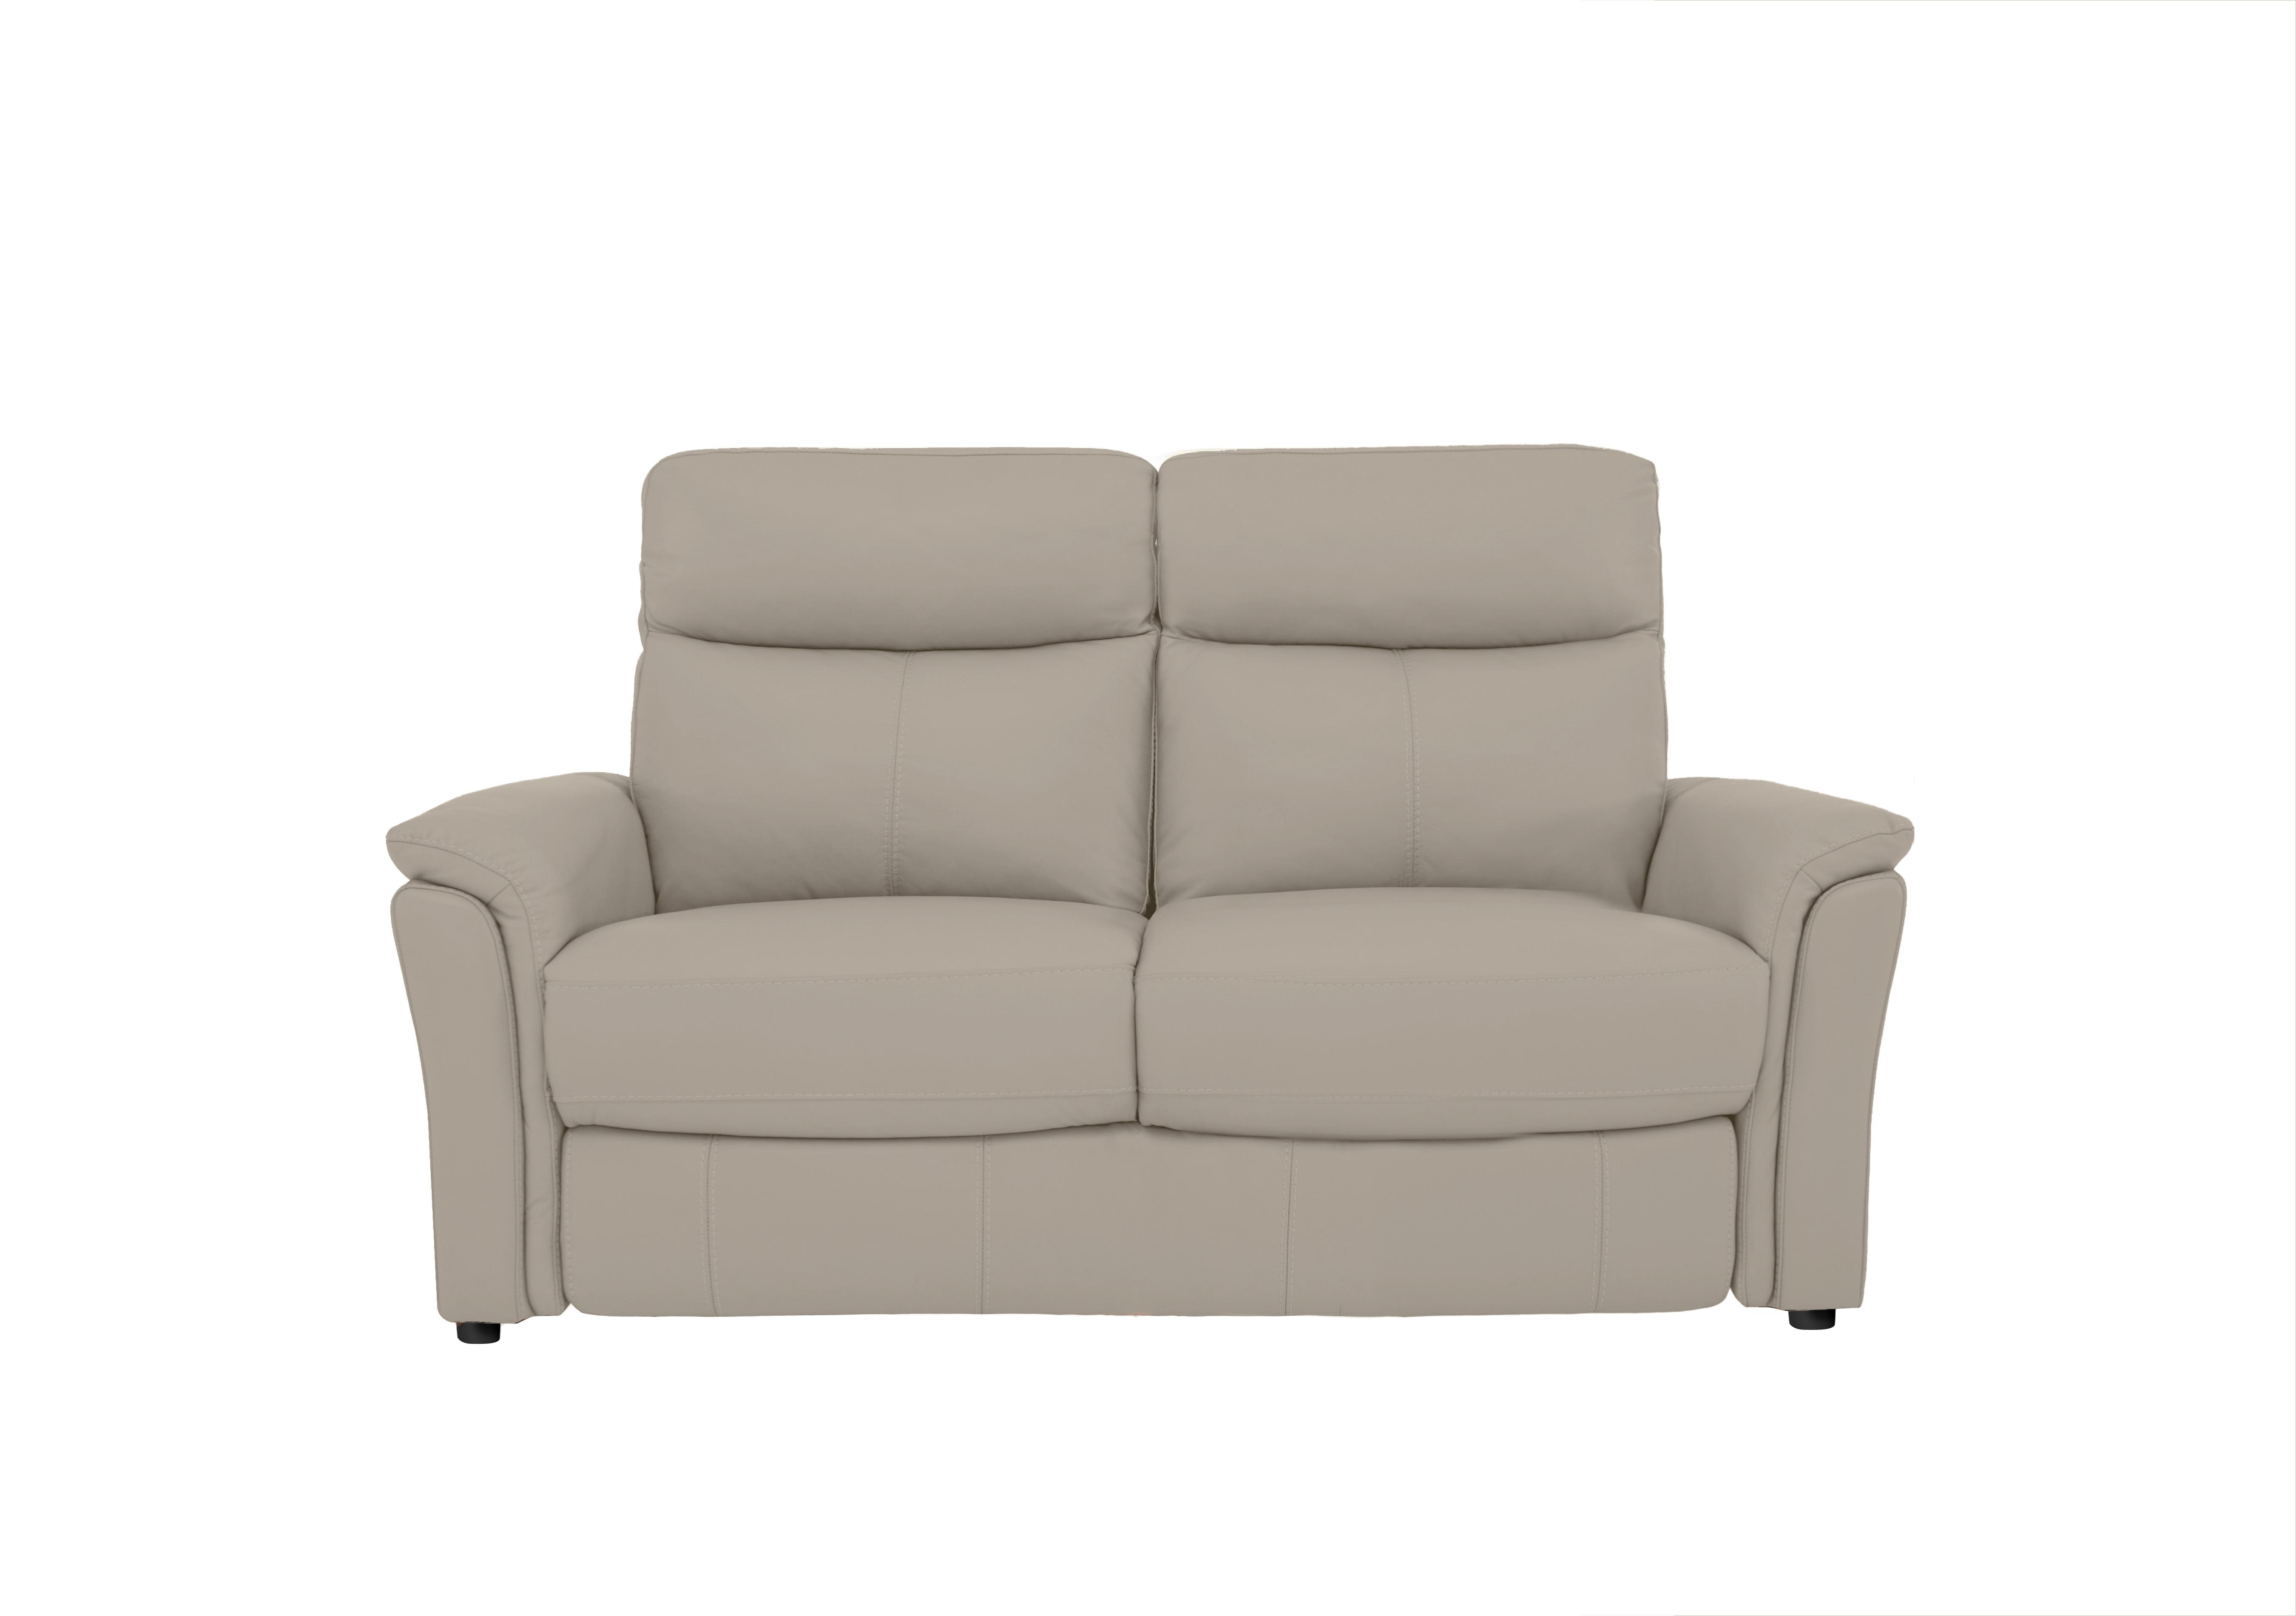 Compact Collection Piccolo 2 Seater Leather Static Sofa in Bv-946b Silver Grey on Furniture Village